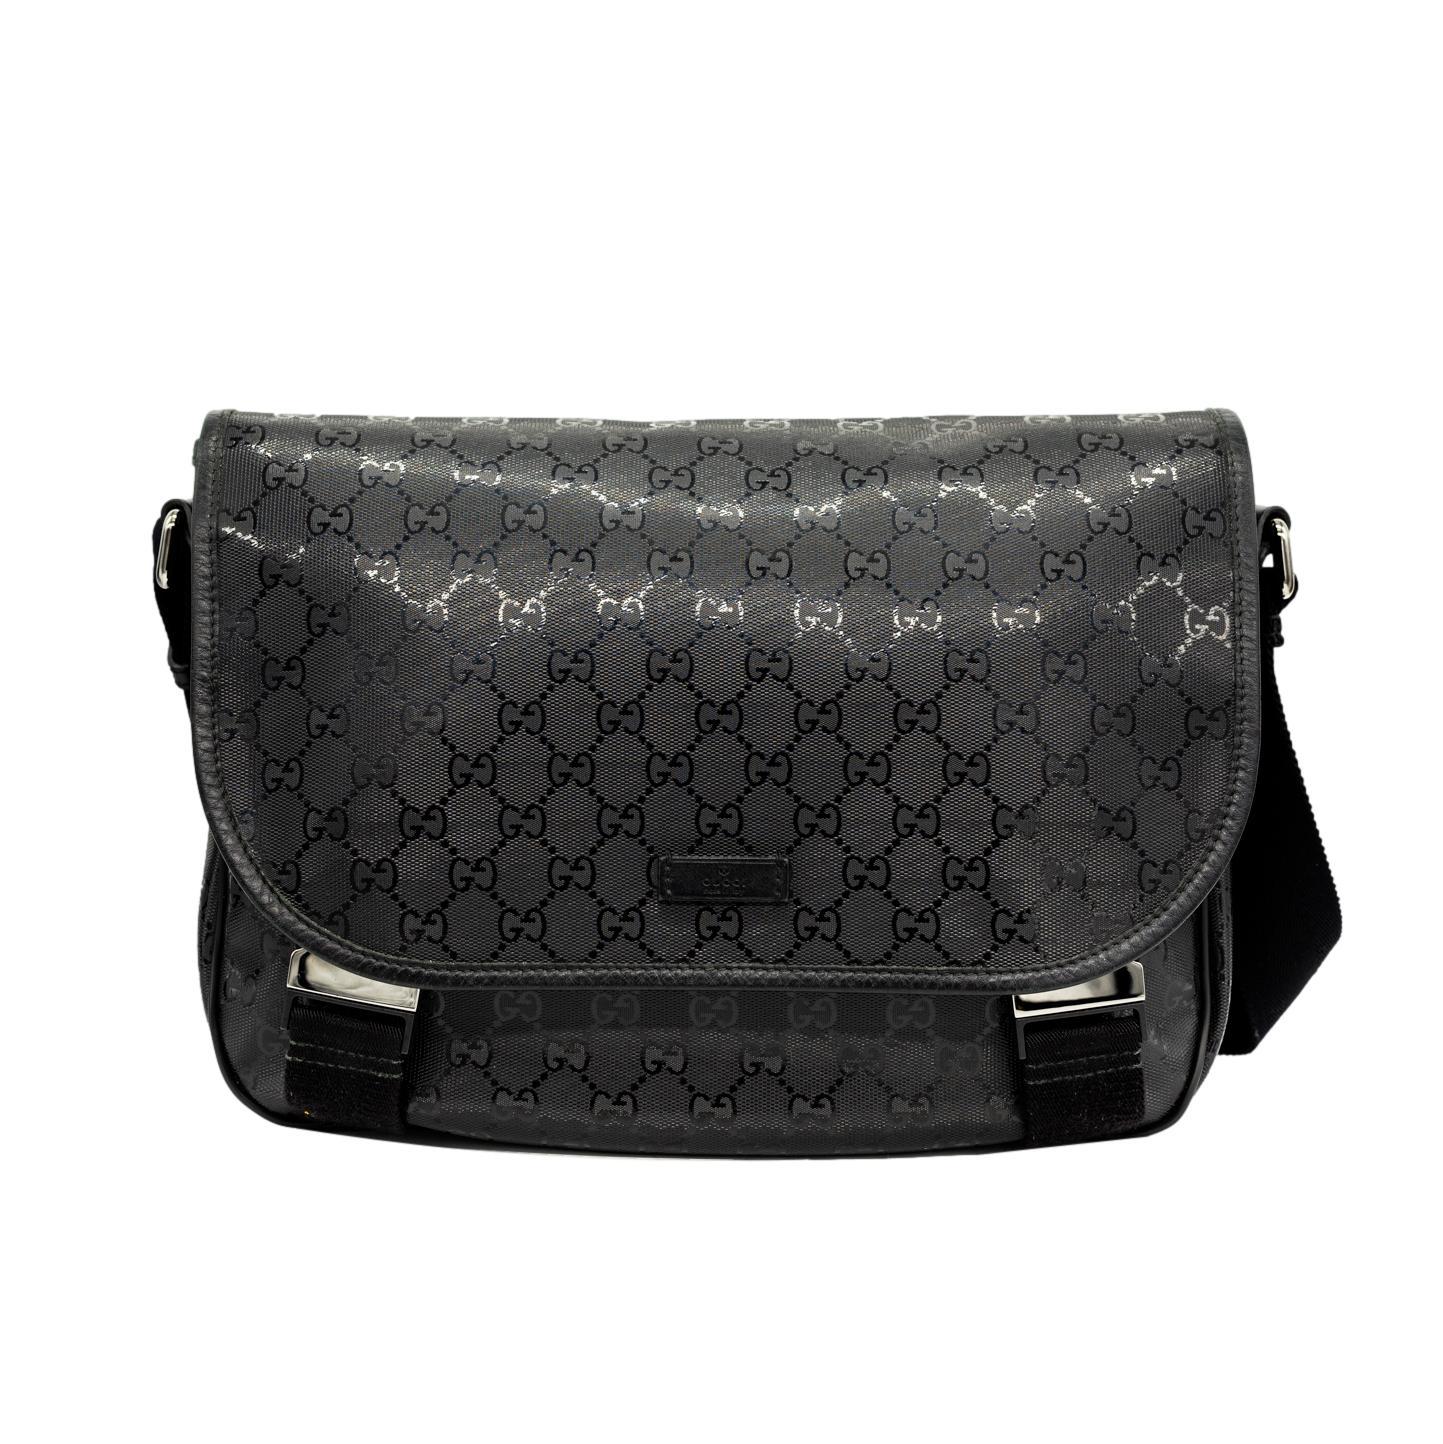 Gucci Glazed Black GG Supreme Canvas Medium Crossbody Unisex Messenger Bag. This classic Gucci Messenger bag was handcrafted from premium black 